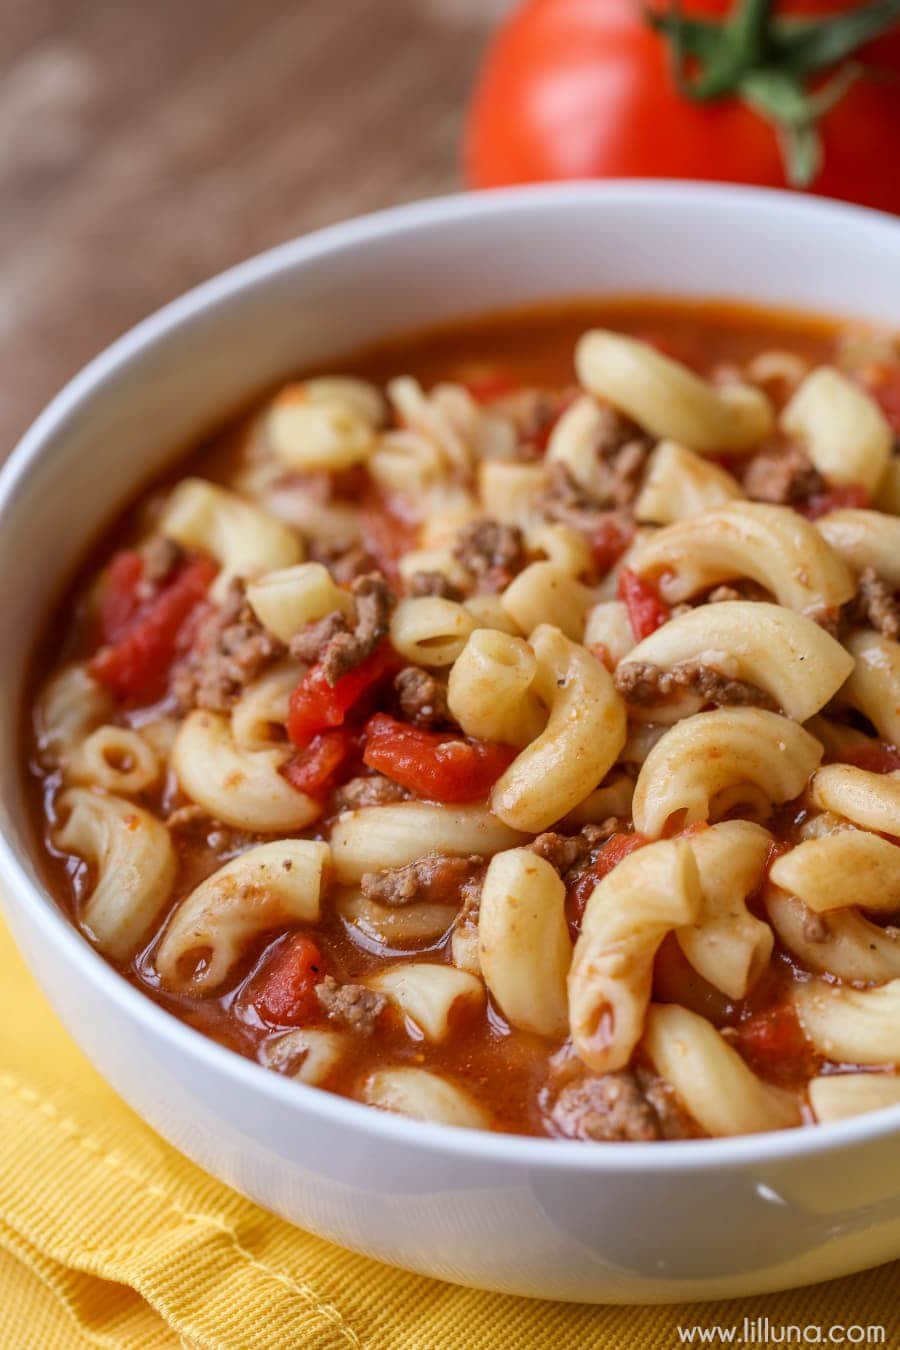 Easy soup recipes - beef and tomato macaroni soup in a white bowl.